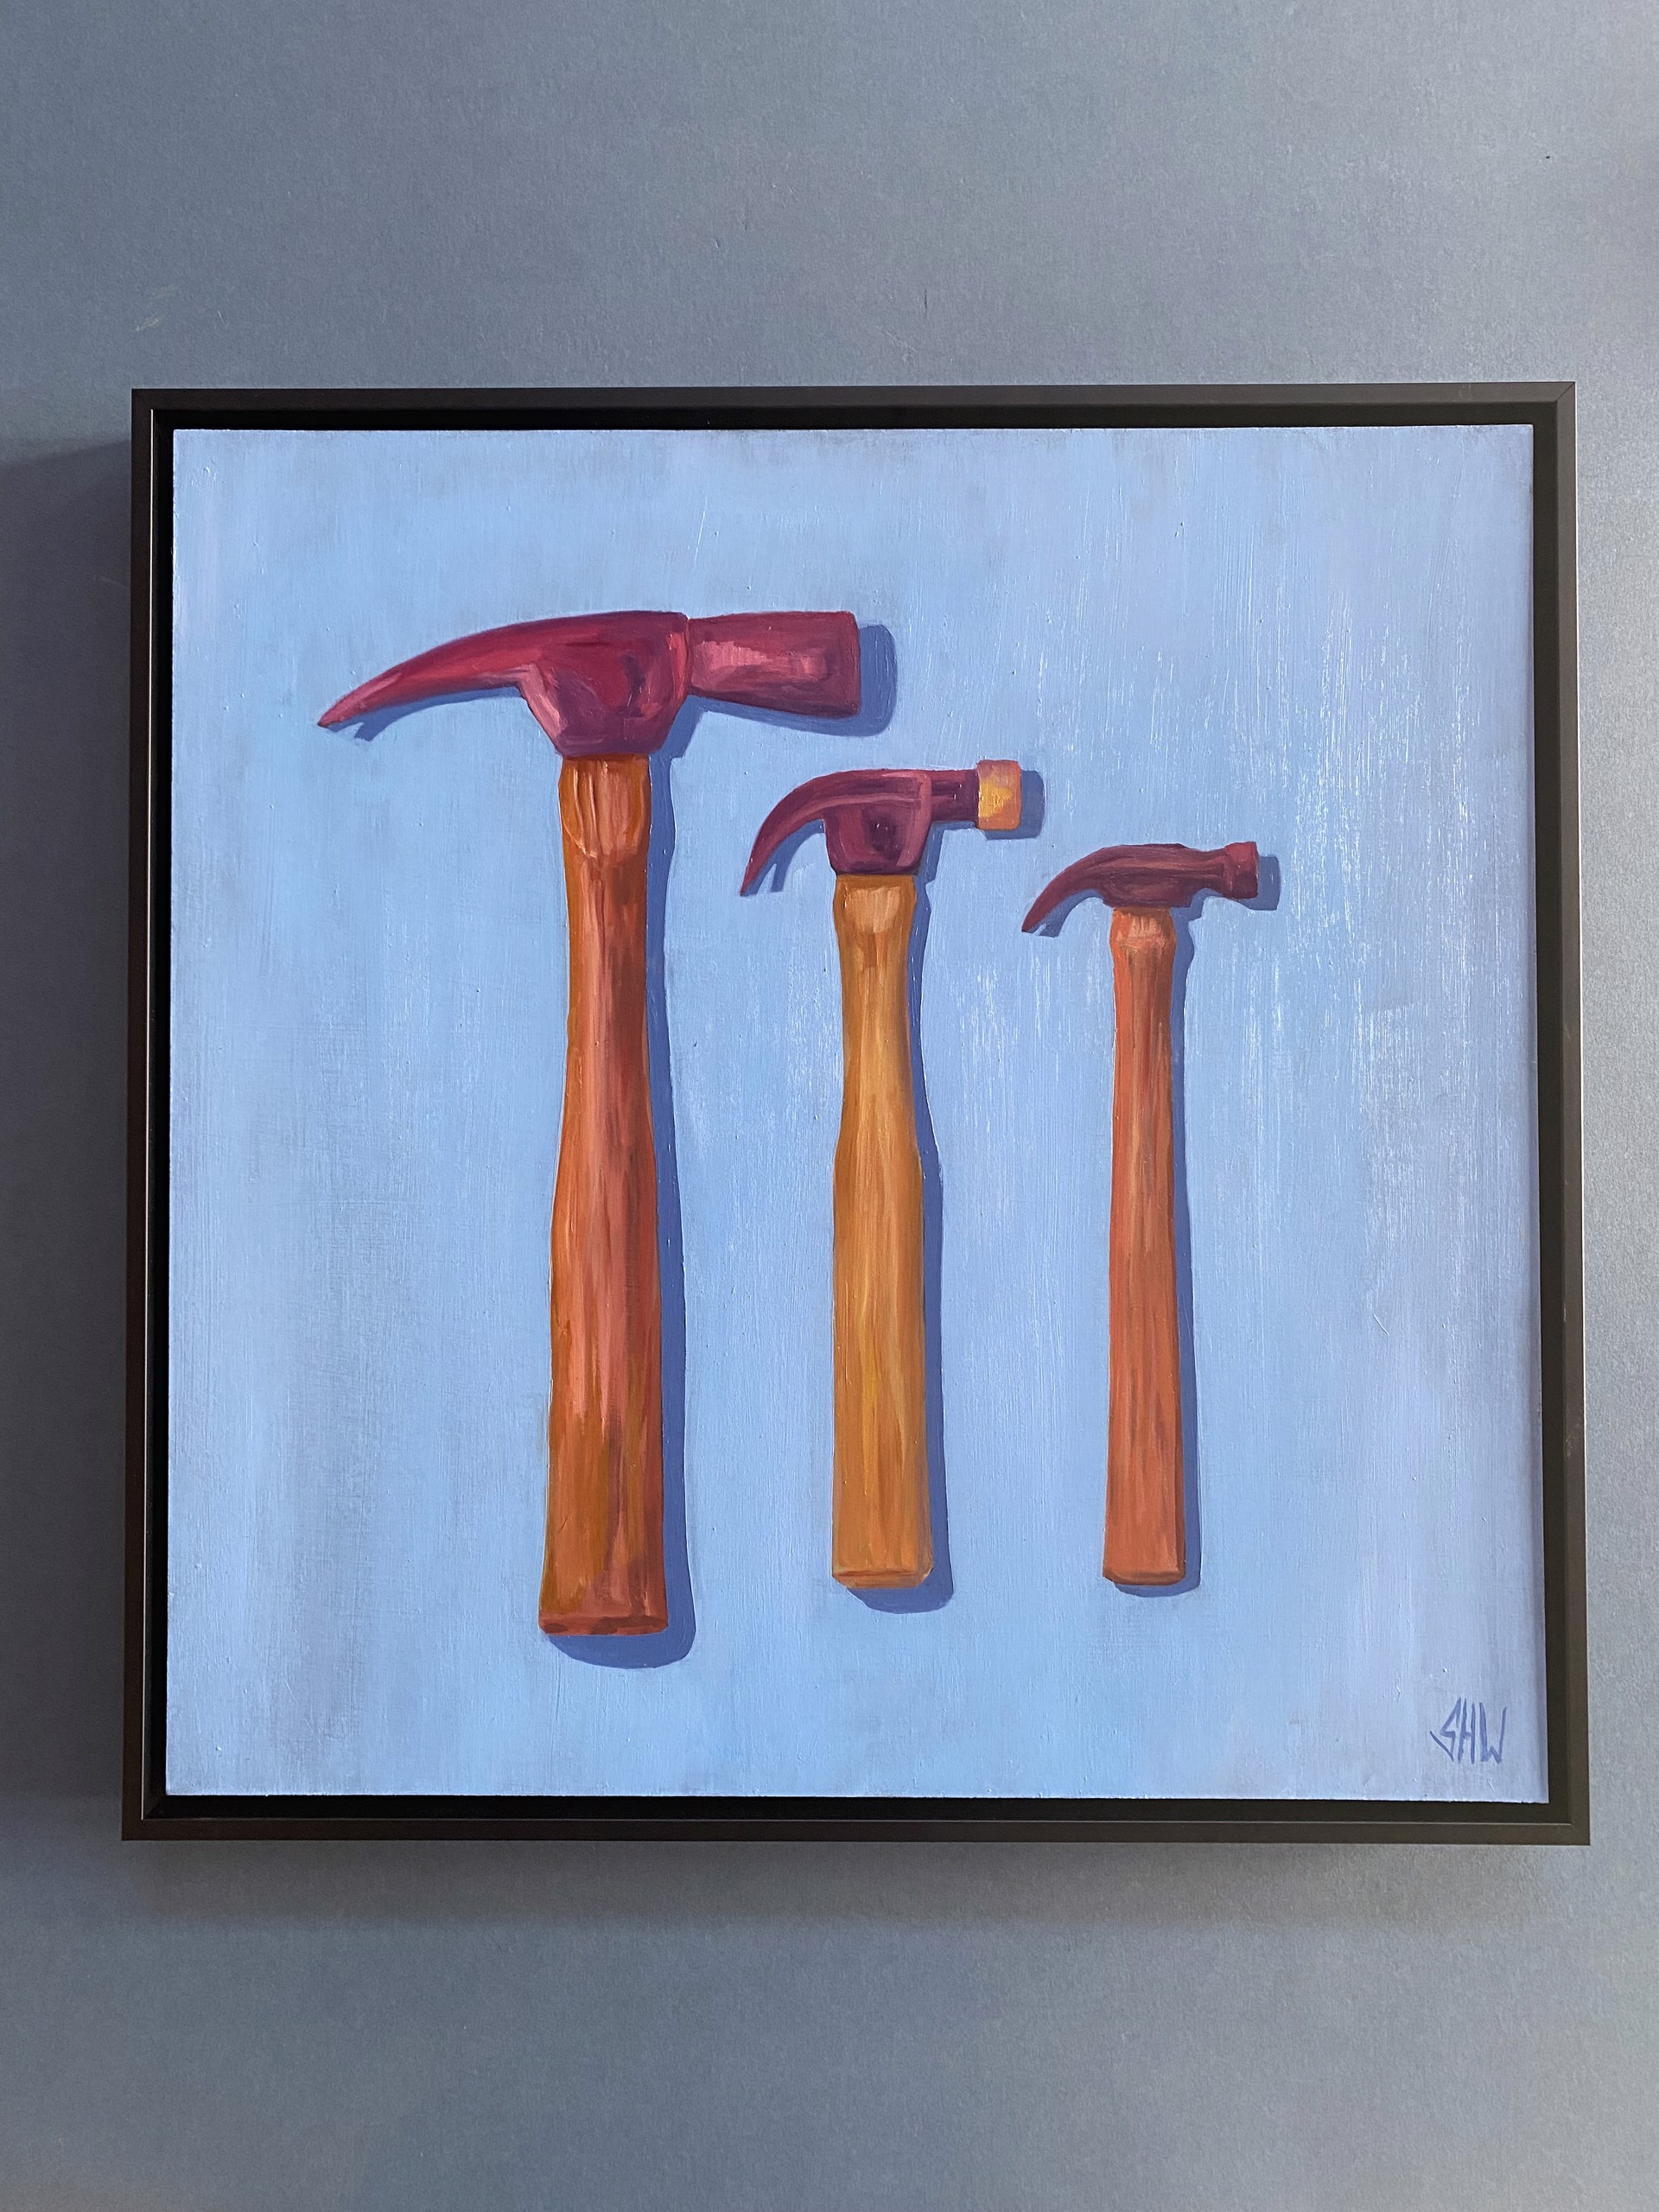 Tool No. 42 (Three Hammers) by Stephen Wells